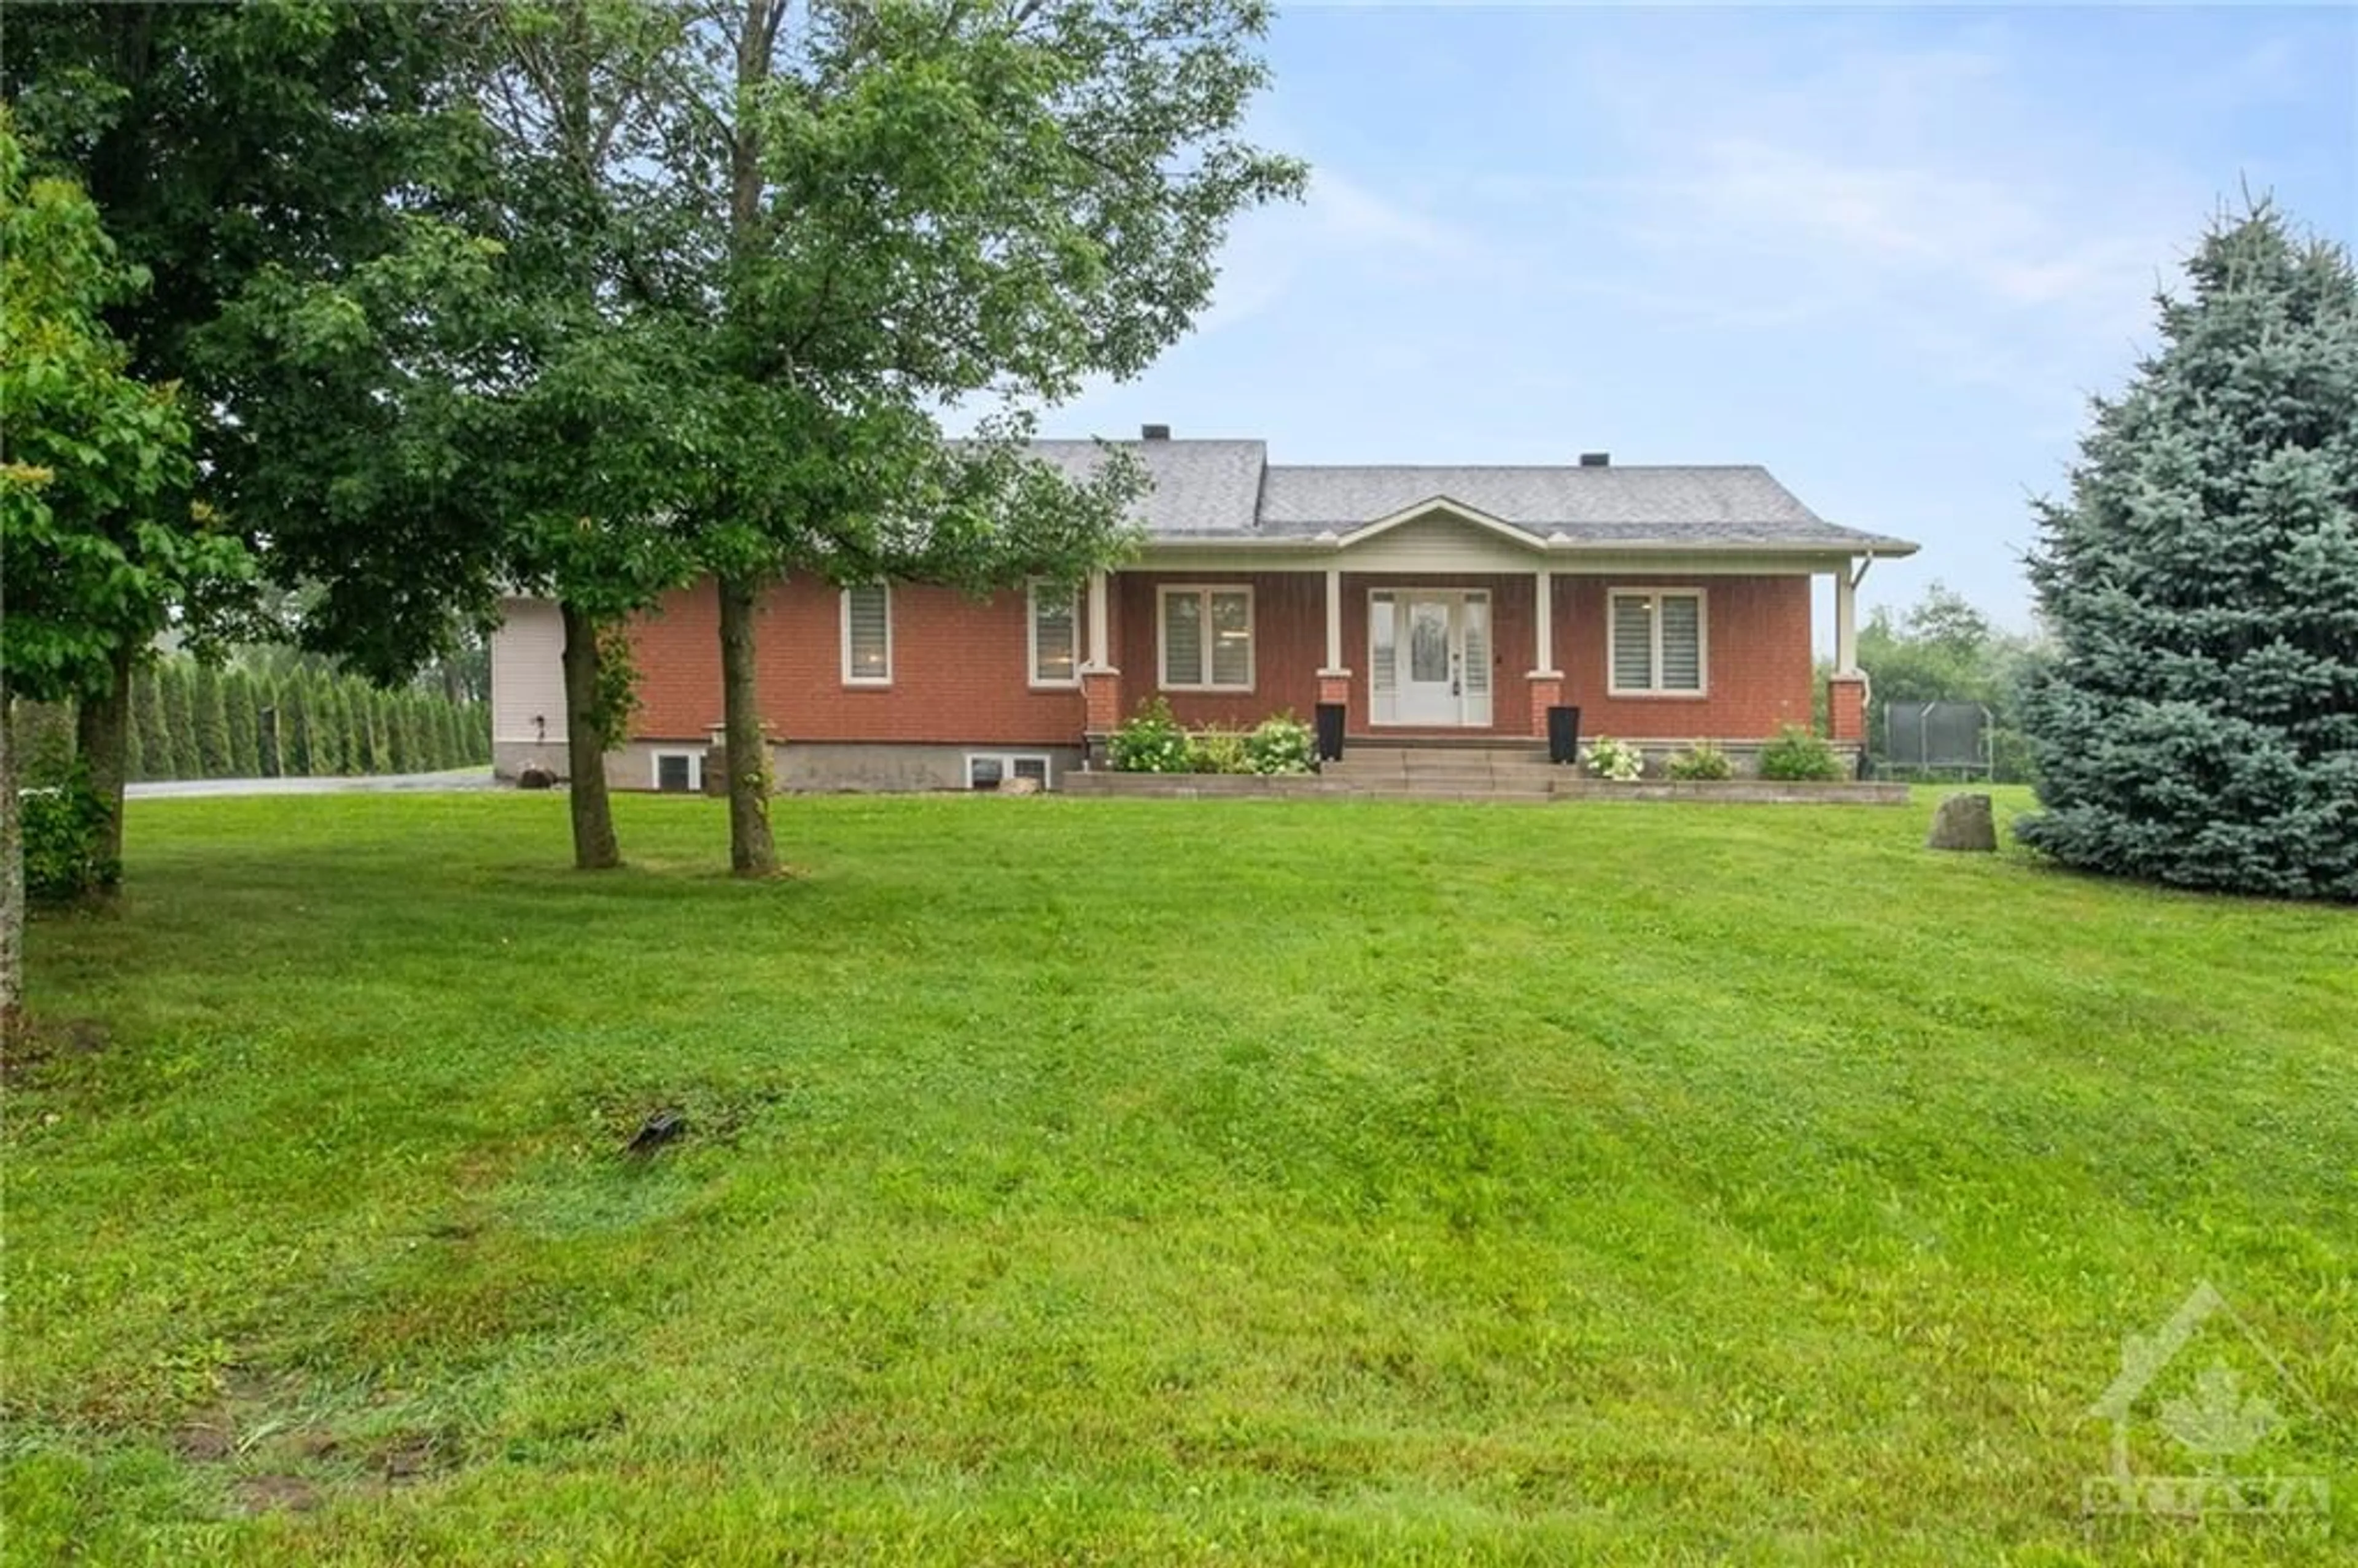 Outside view for 2760 JOHANNES St, Metcalfe Ontario K0A 2P0